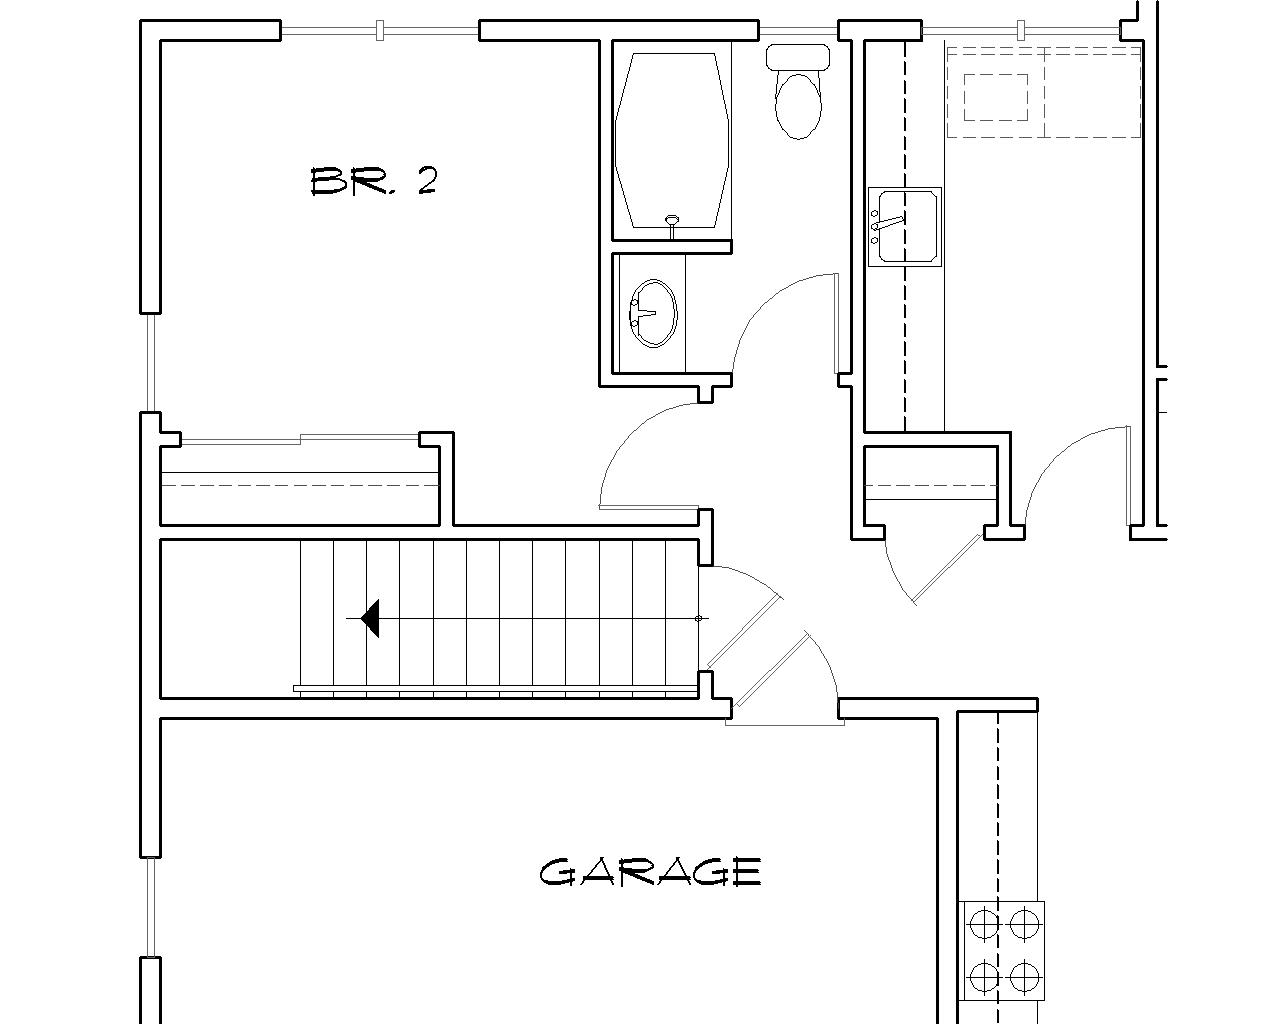 Cottage House  Plan with 2 Bedrooms and 2 5 Baths Plan 5261